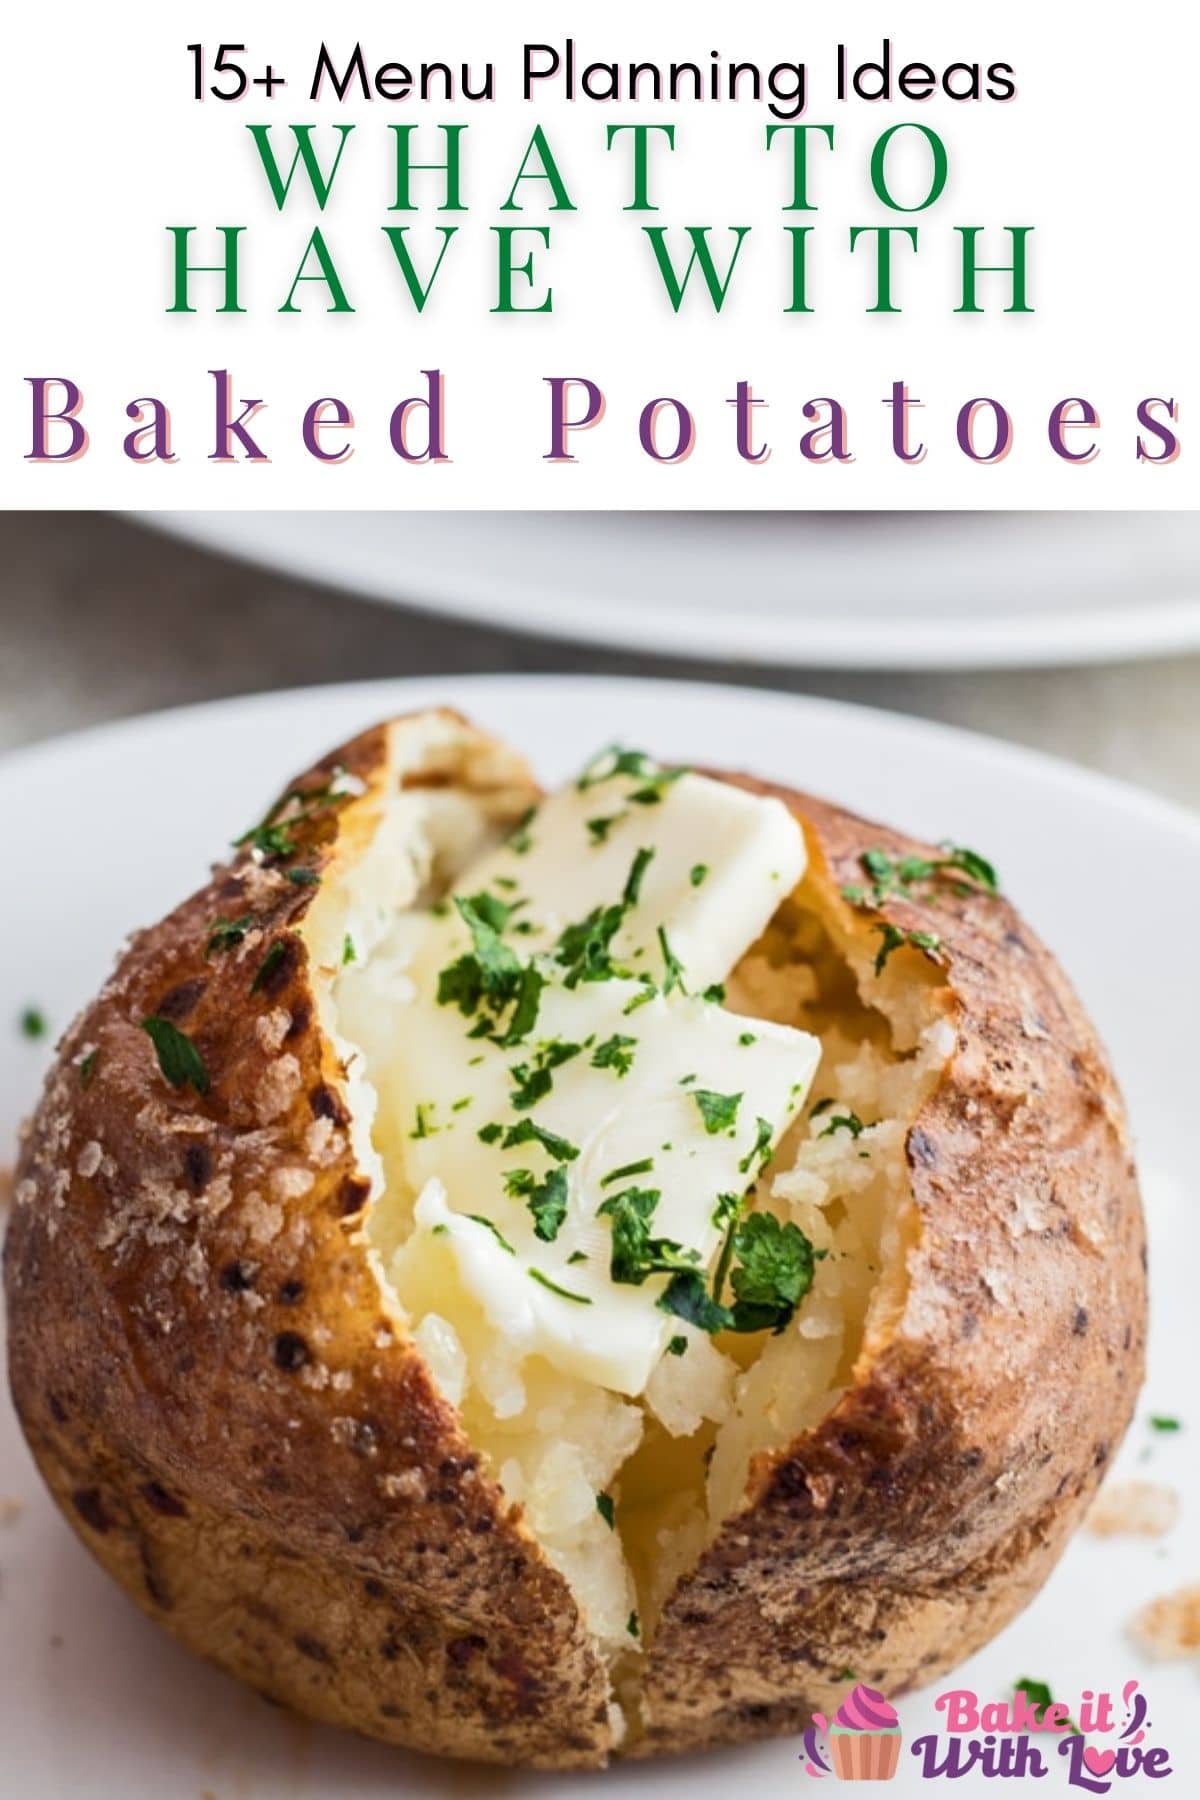 What To Serve With Baked Potatoes (15+ Amazing Hearty Dishes to Eat!)